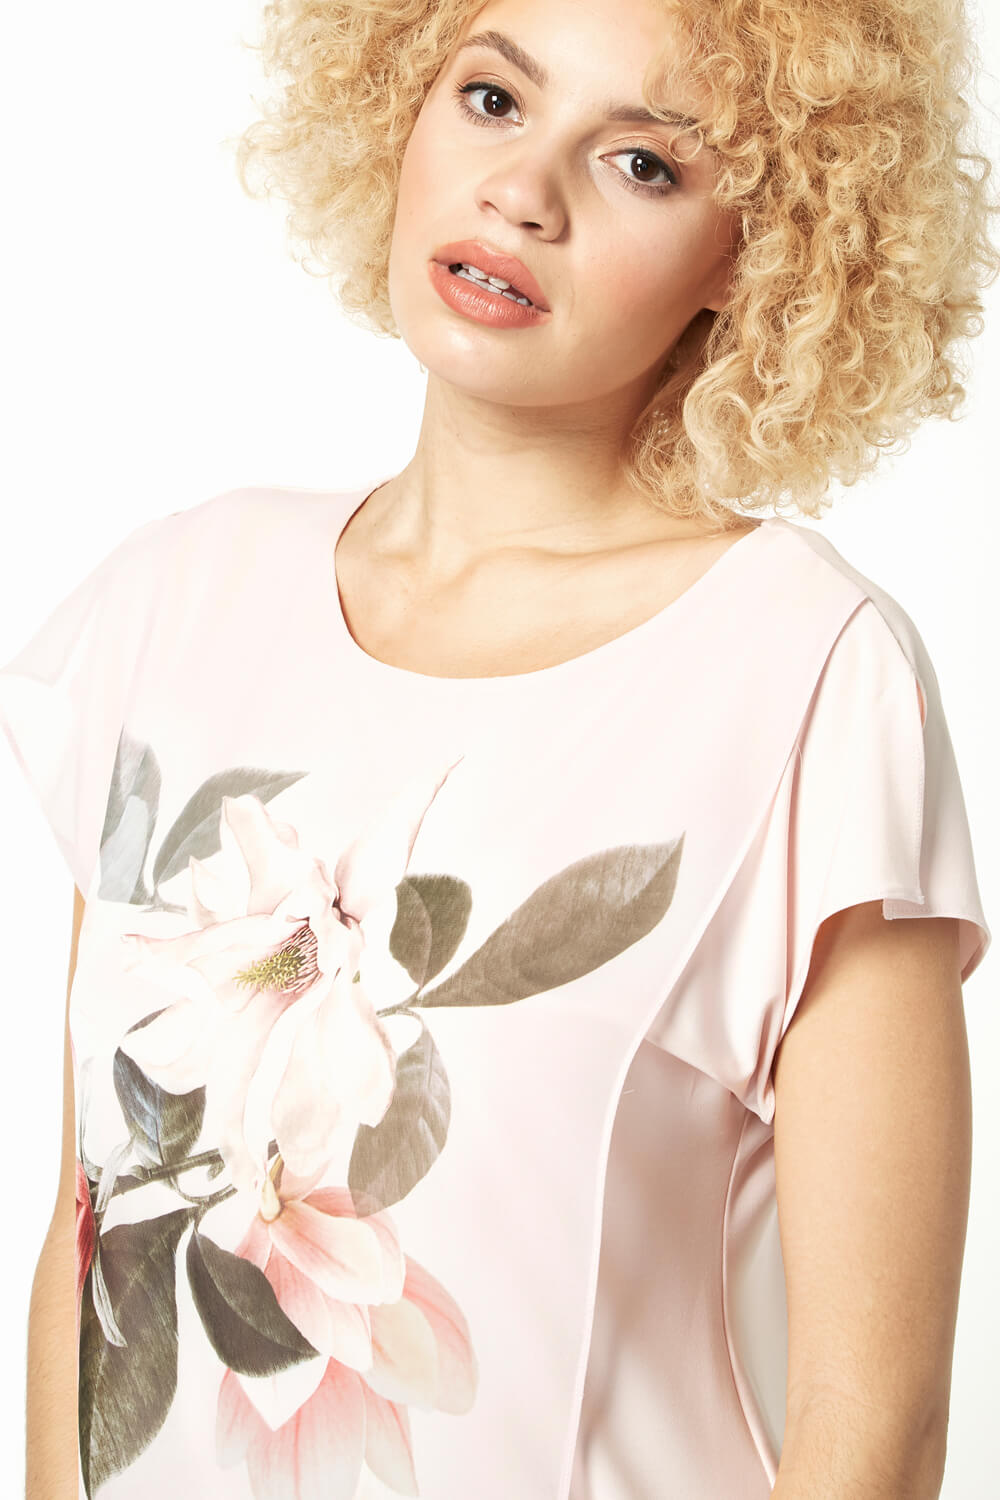 PINK Asymmetric Chiffon Overlay Floral Top, Image 4 of 5